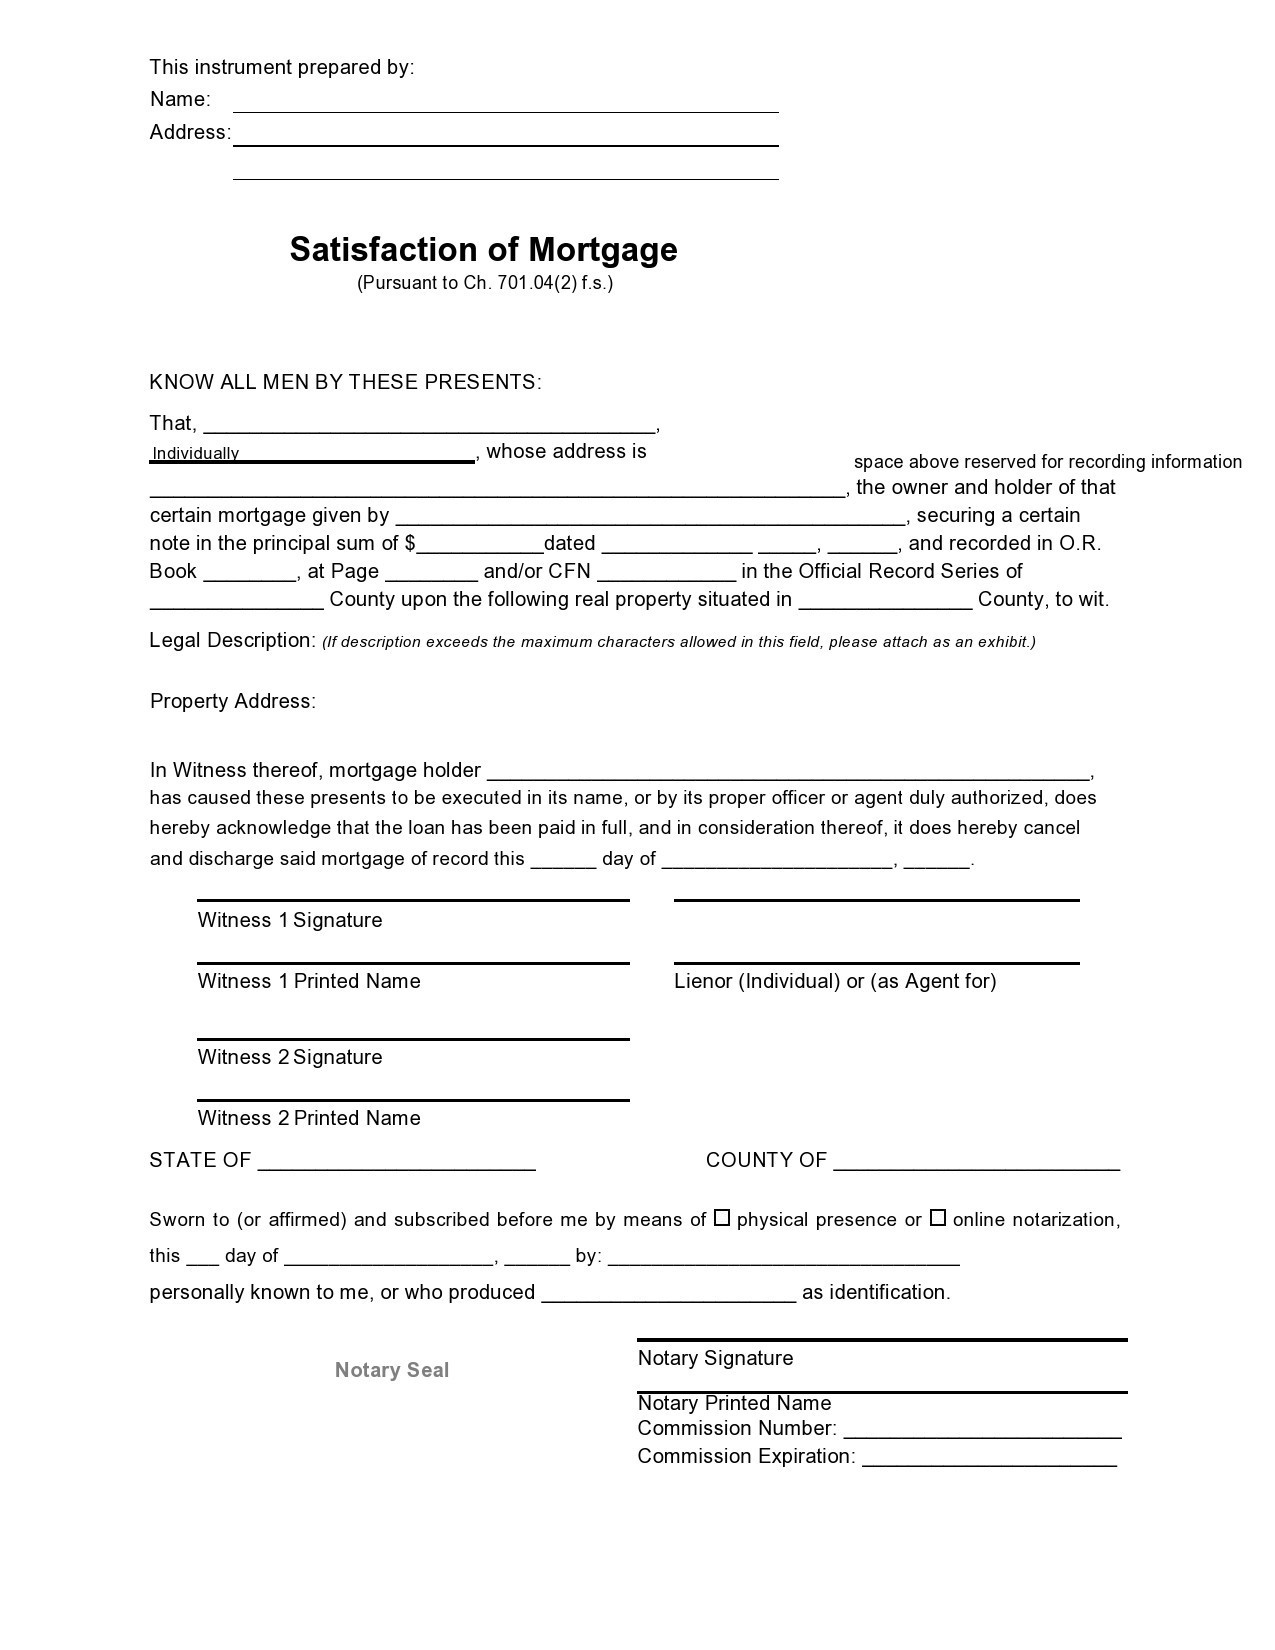 Free satisfaction of mortgage 34